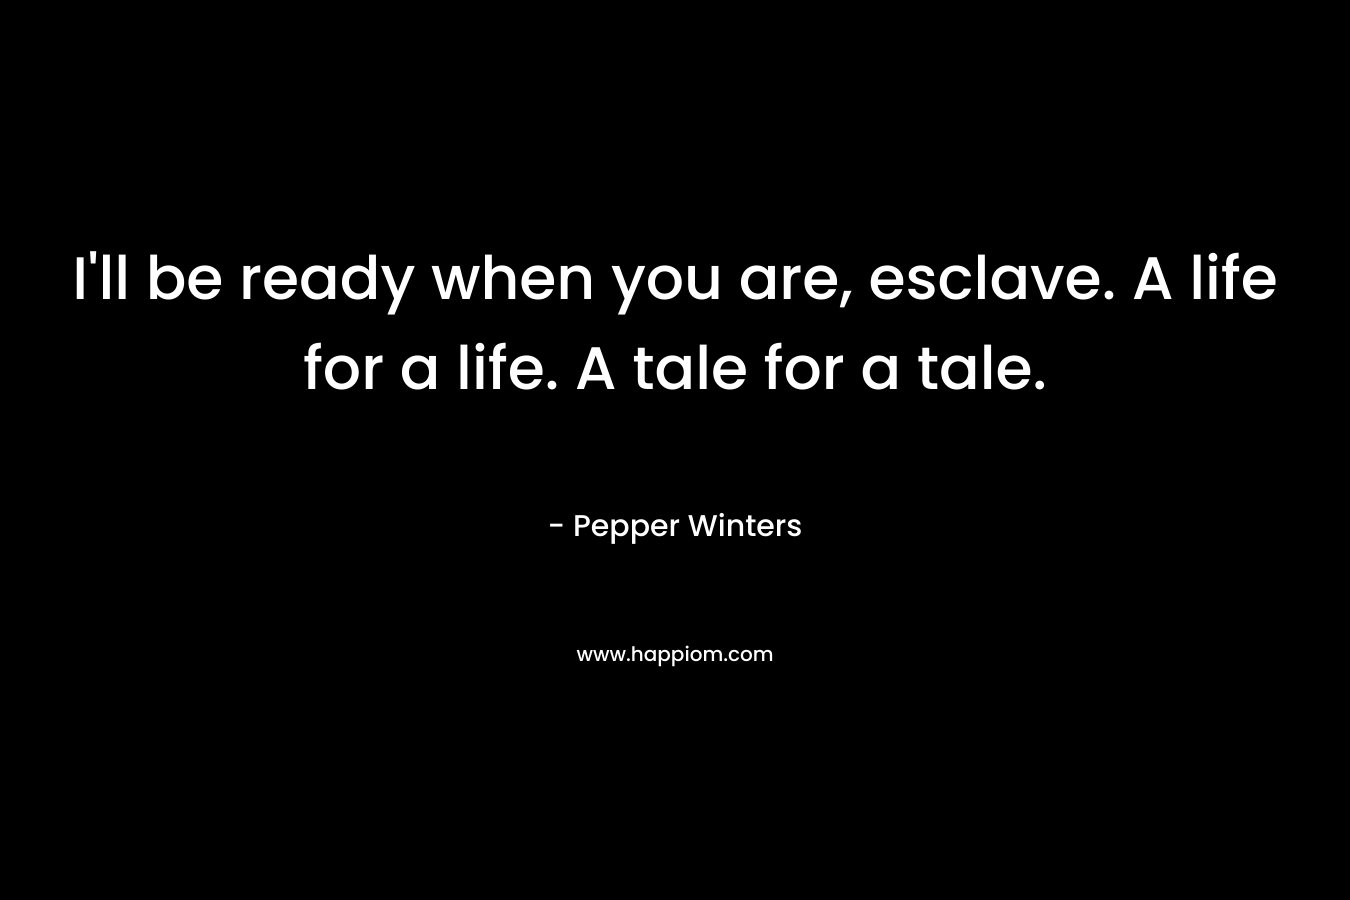 I'll be ready when you are, esclave. A life for a life. A tale for a tale.